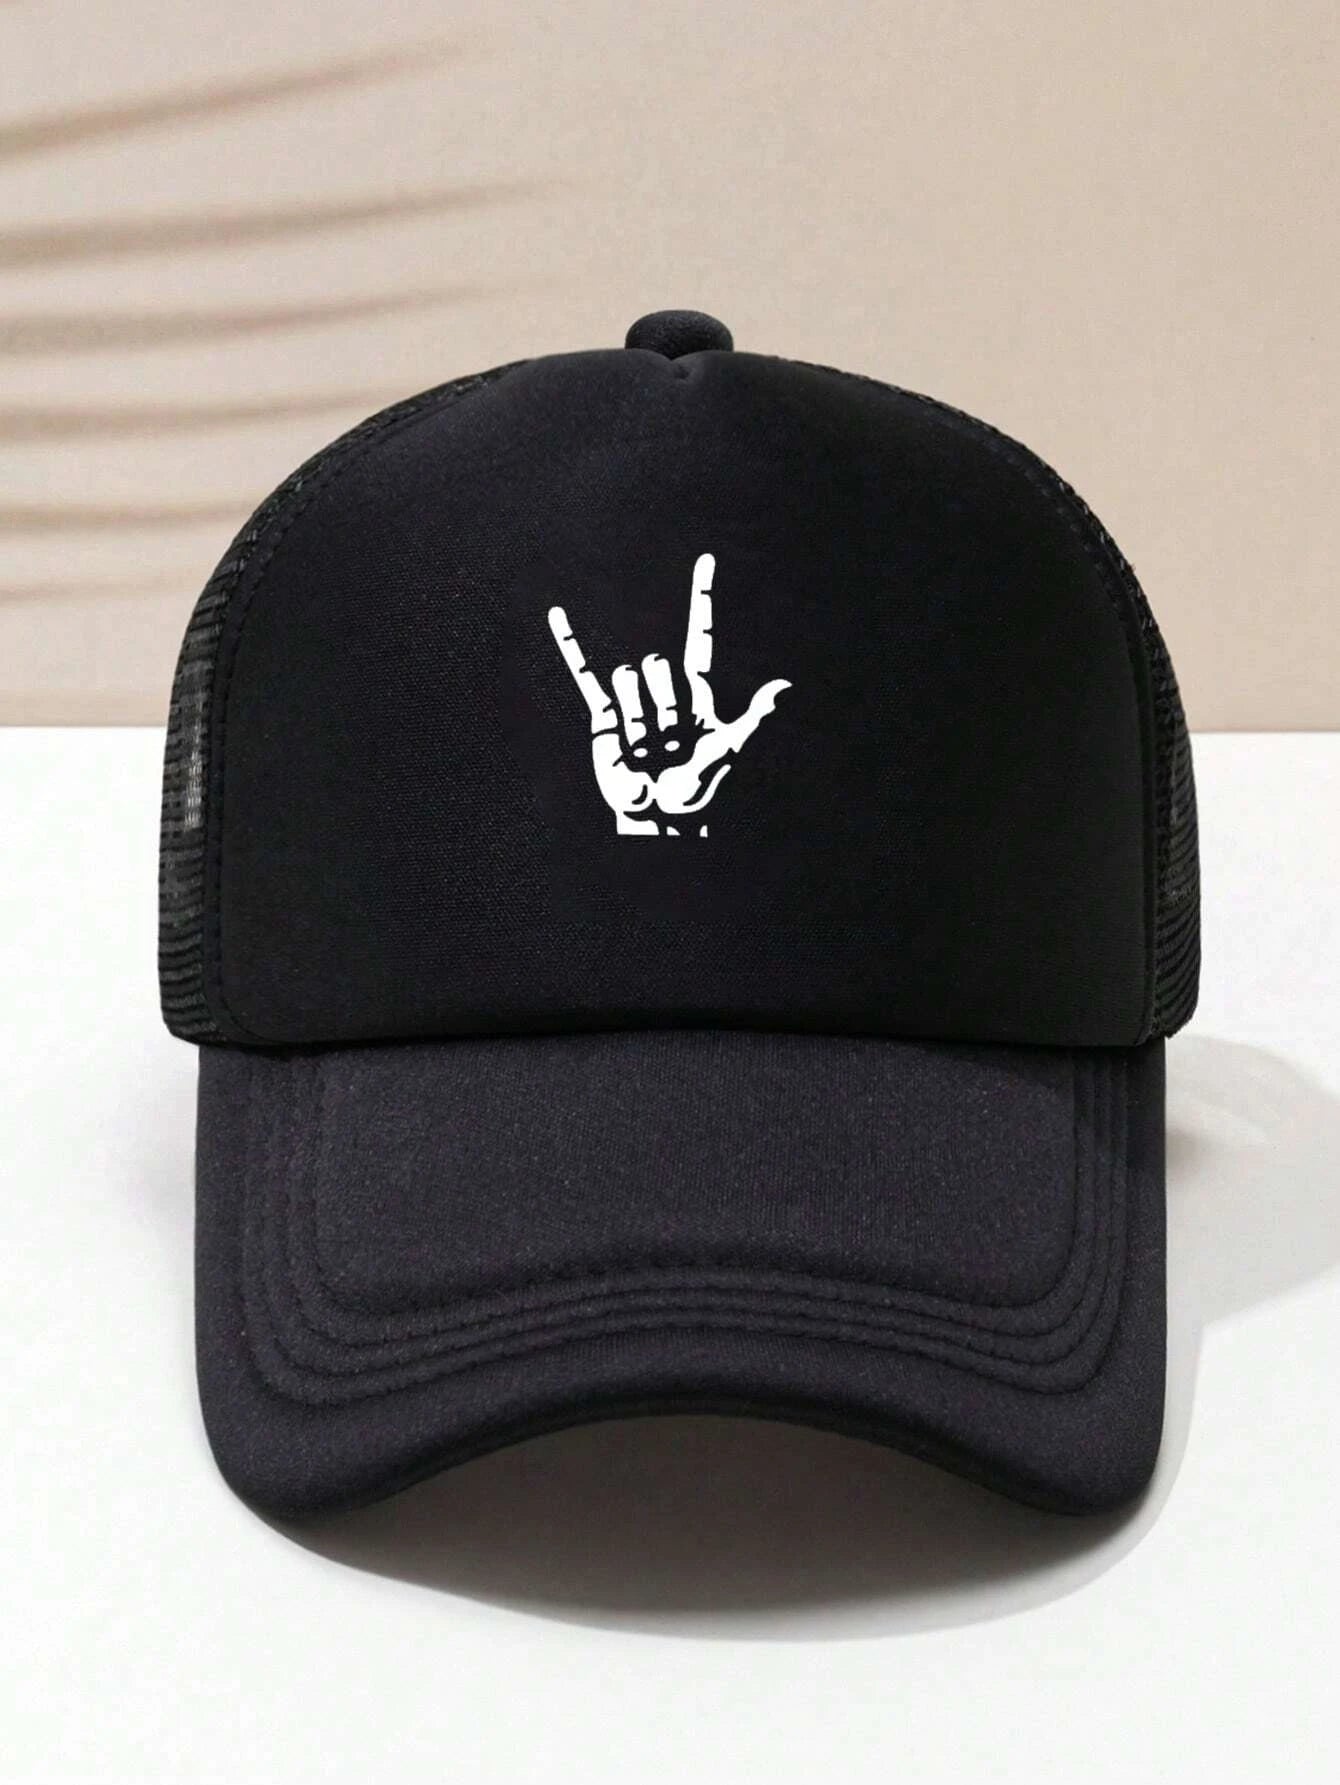 1pc Unisex Hand Pattern Adjustable Casual Baseball Cap For Daily Life